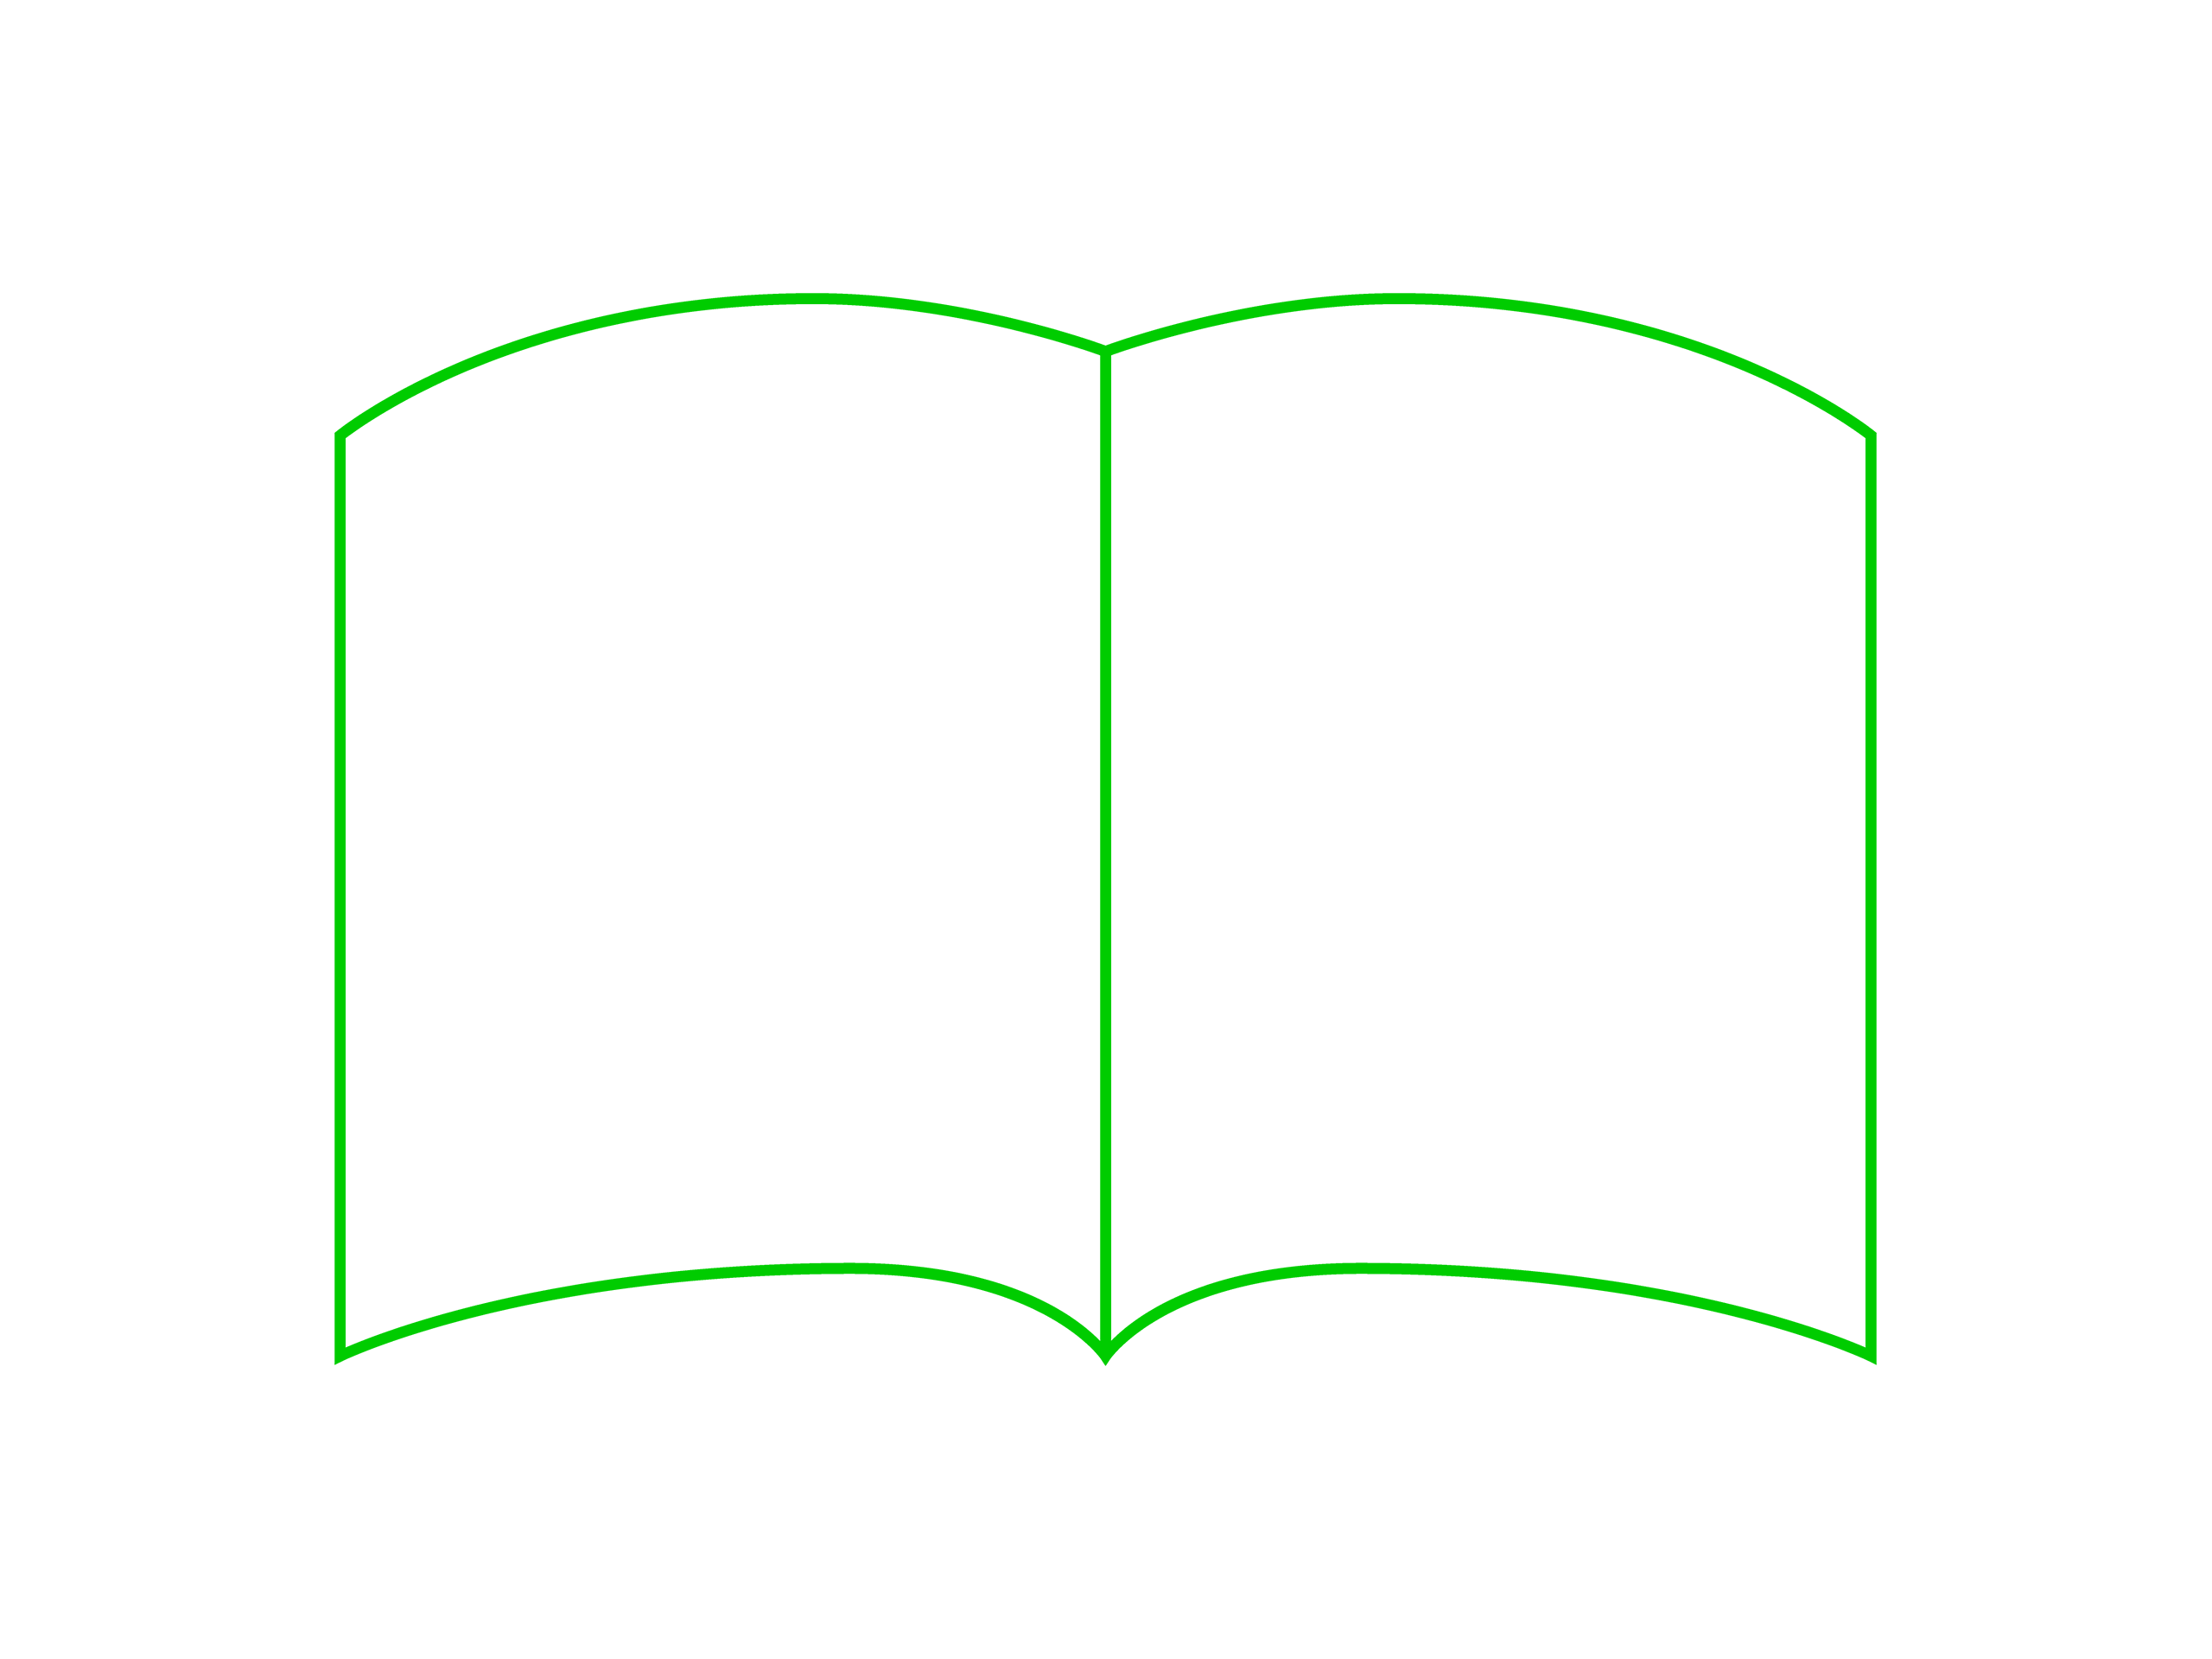 An open book drawn in a green outline